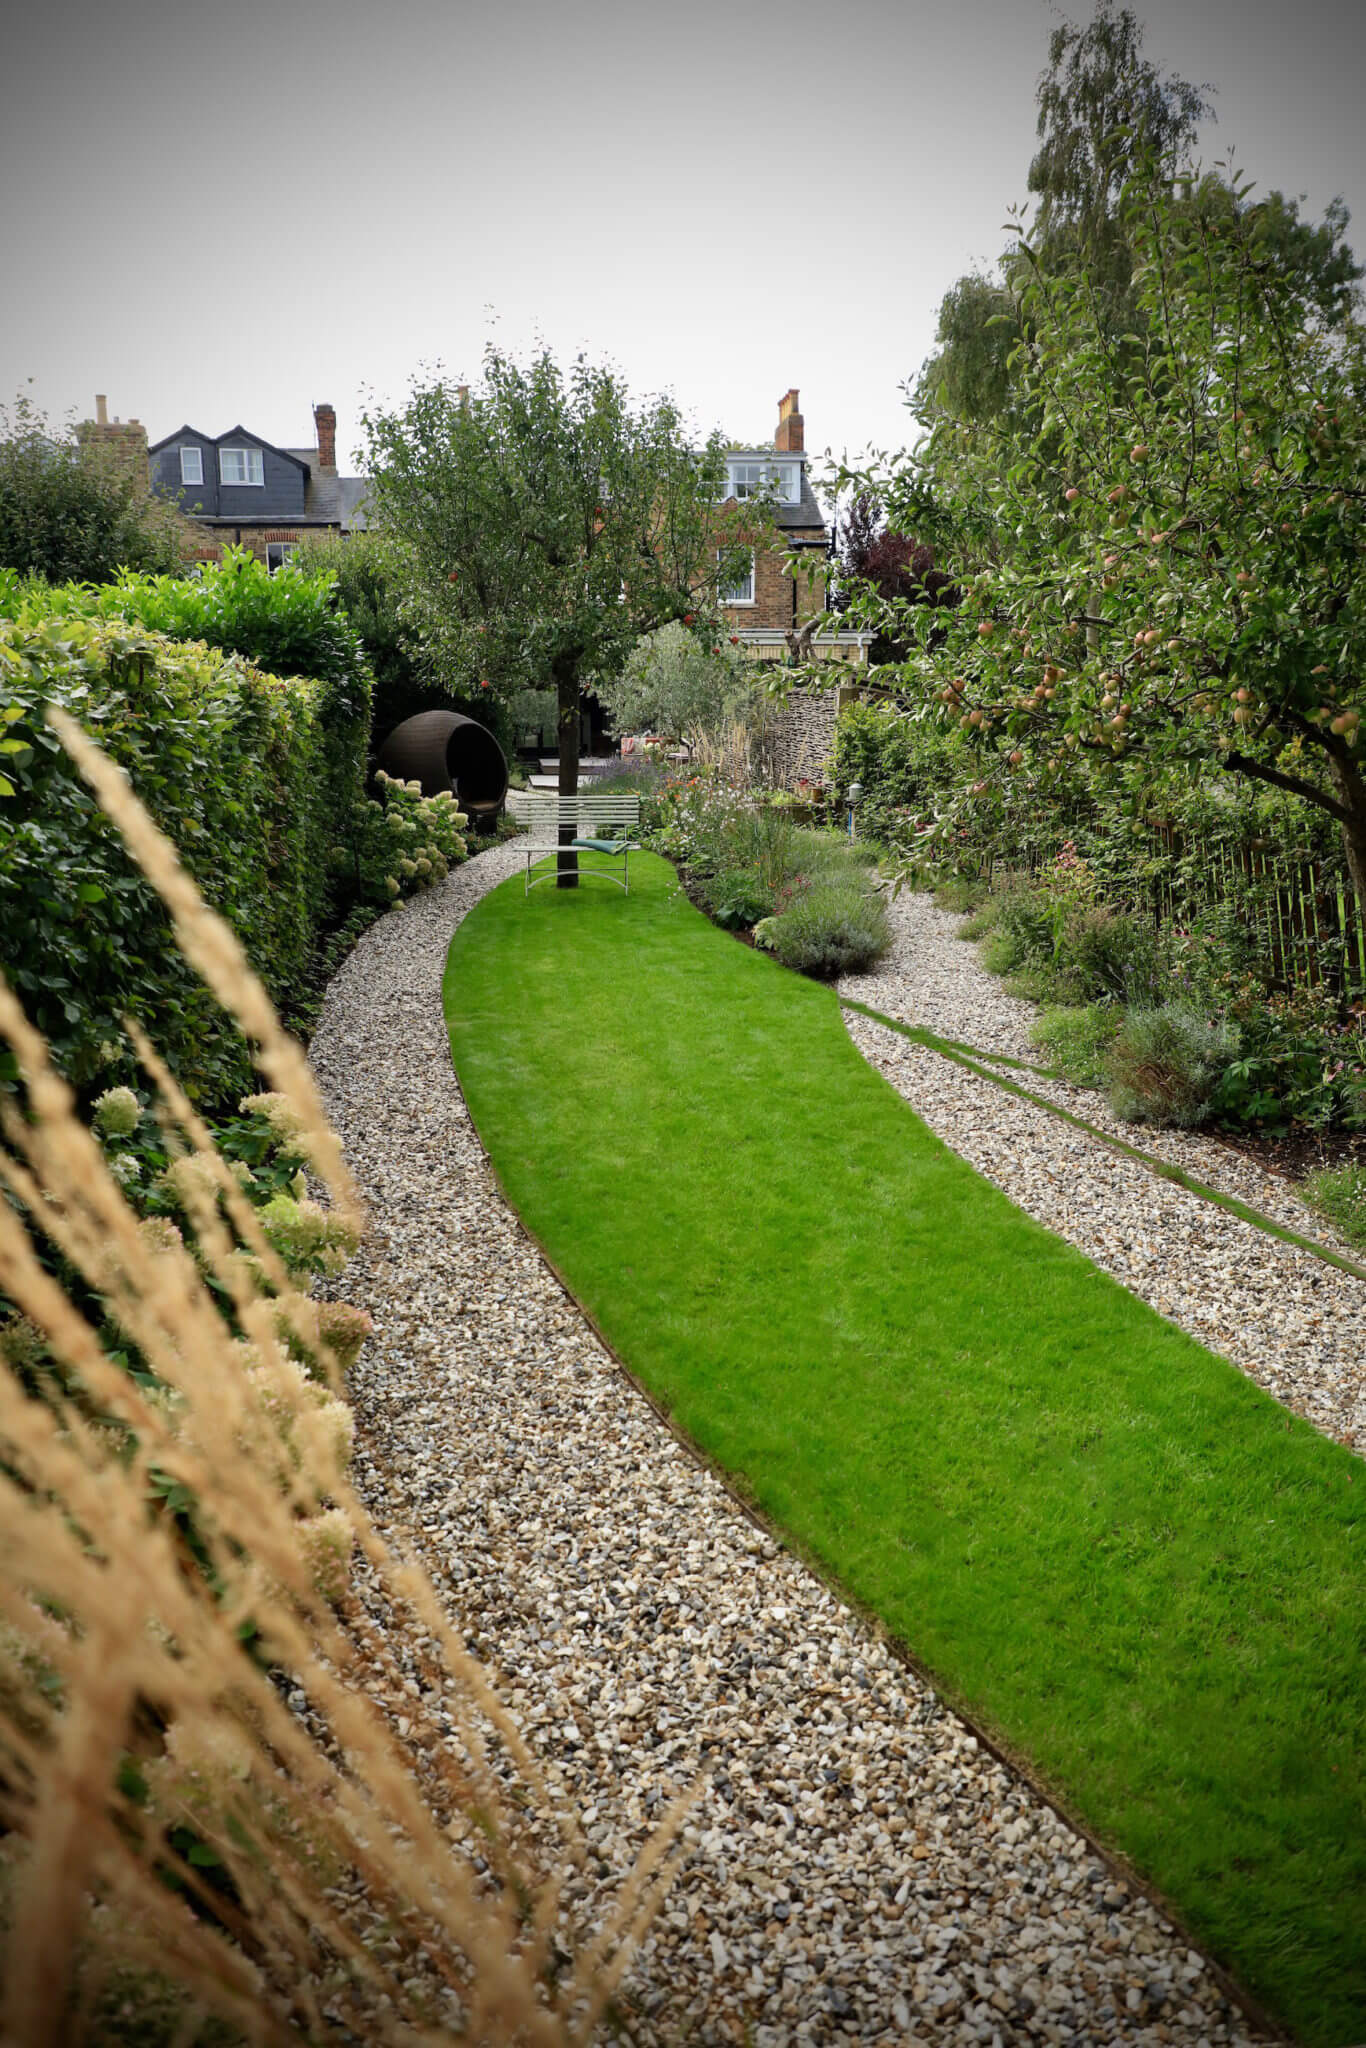 A overhead shot of a narrow green lawn with paths running eitherside